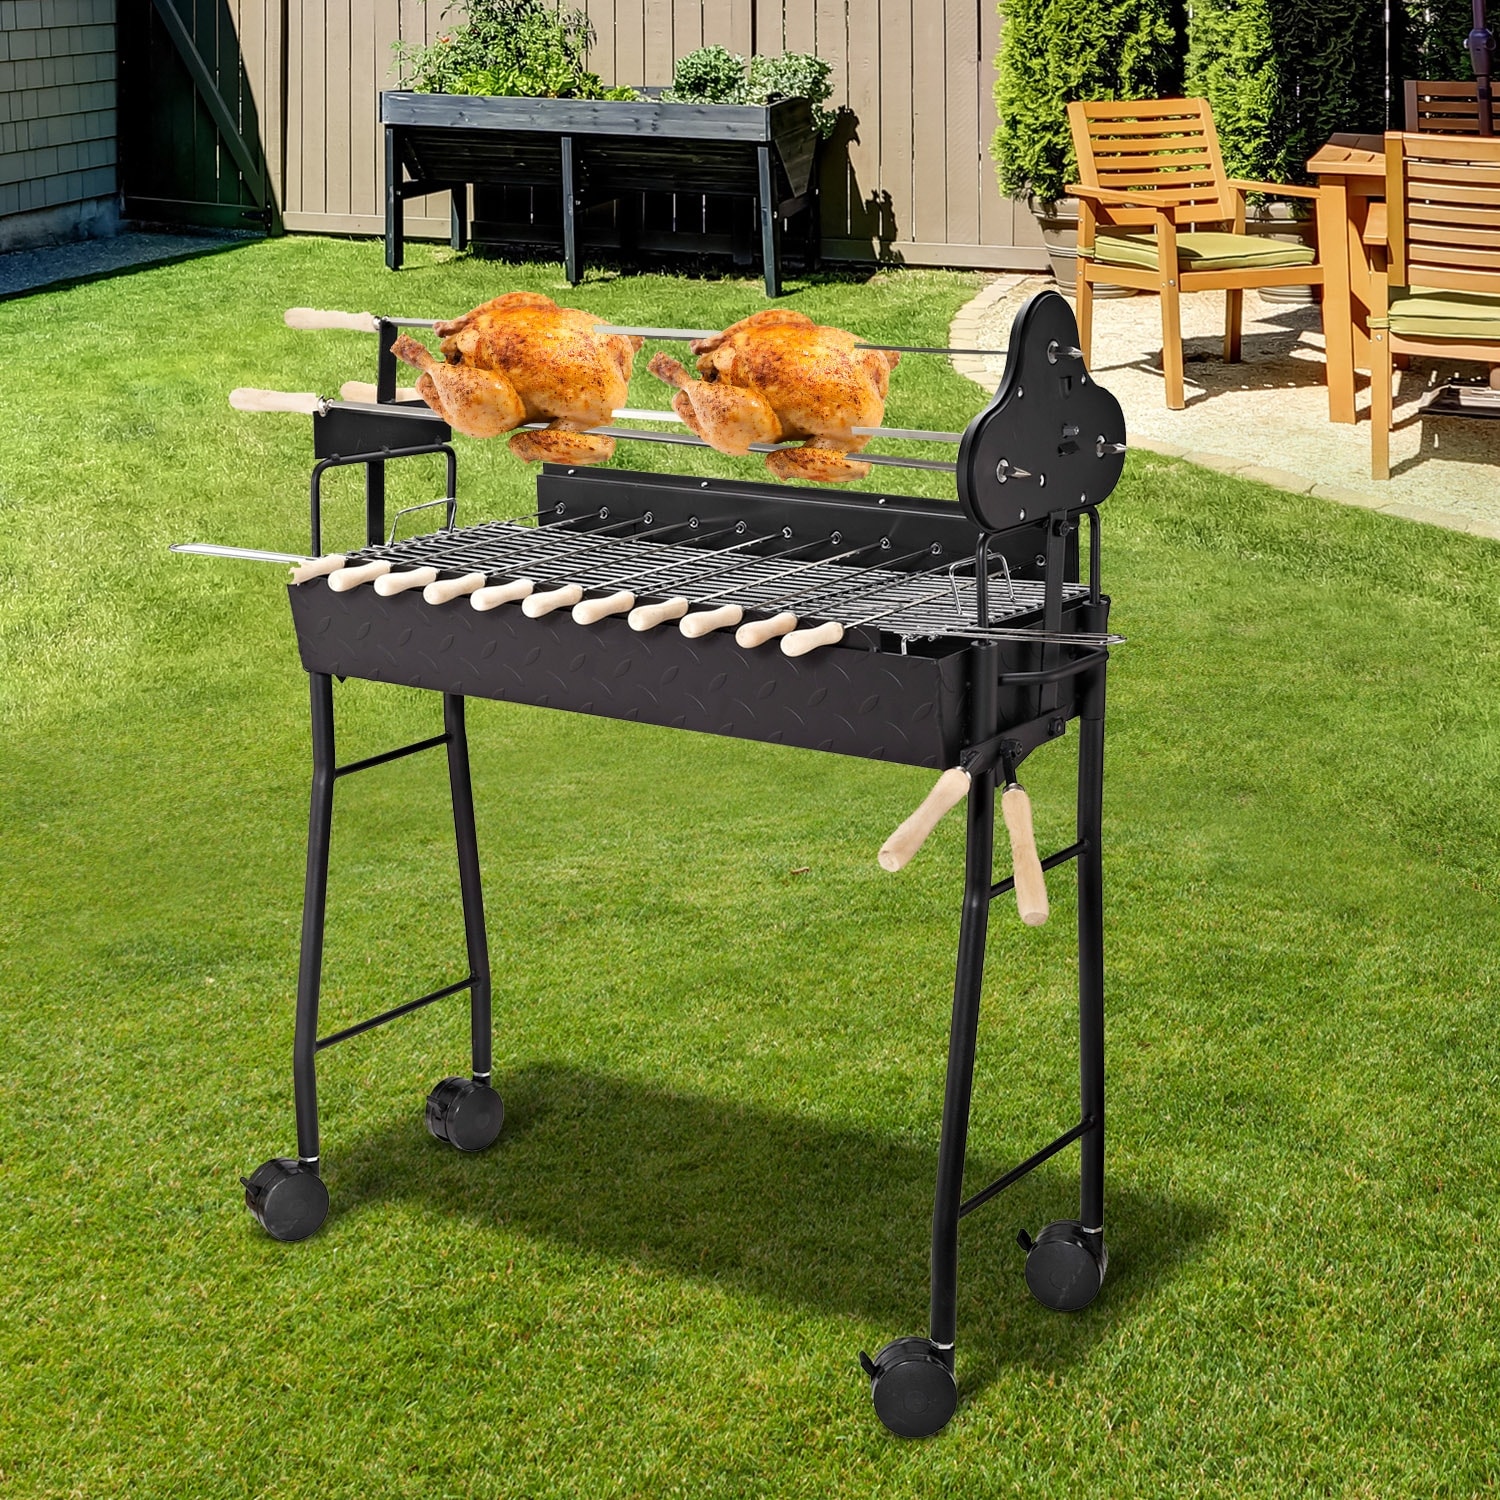 Outsunny Charcoal BBQ Grill Trolley Barbecue Patio Outdoor Garden Heating Smoker 